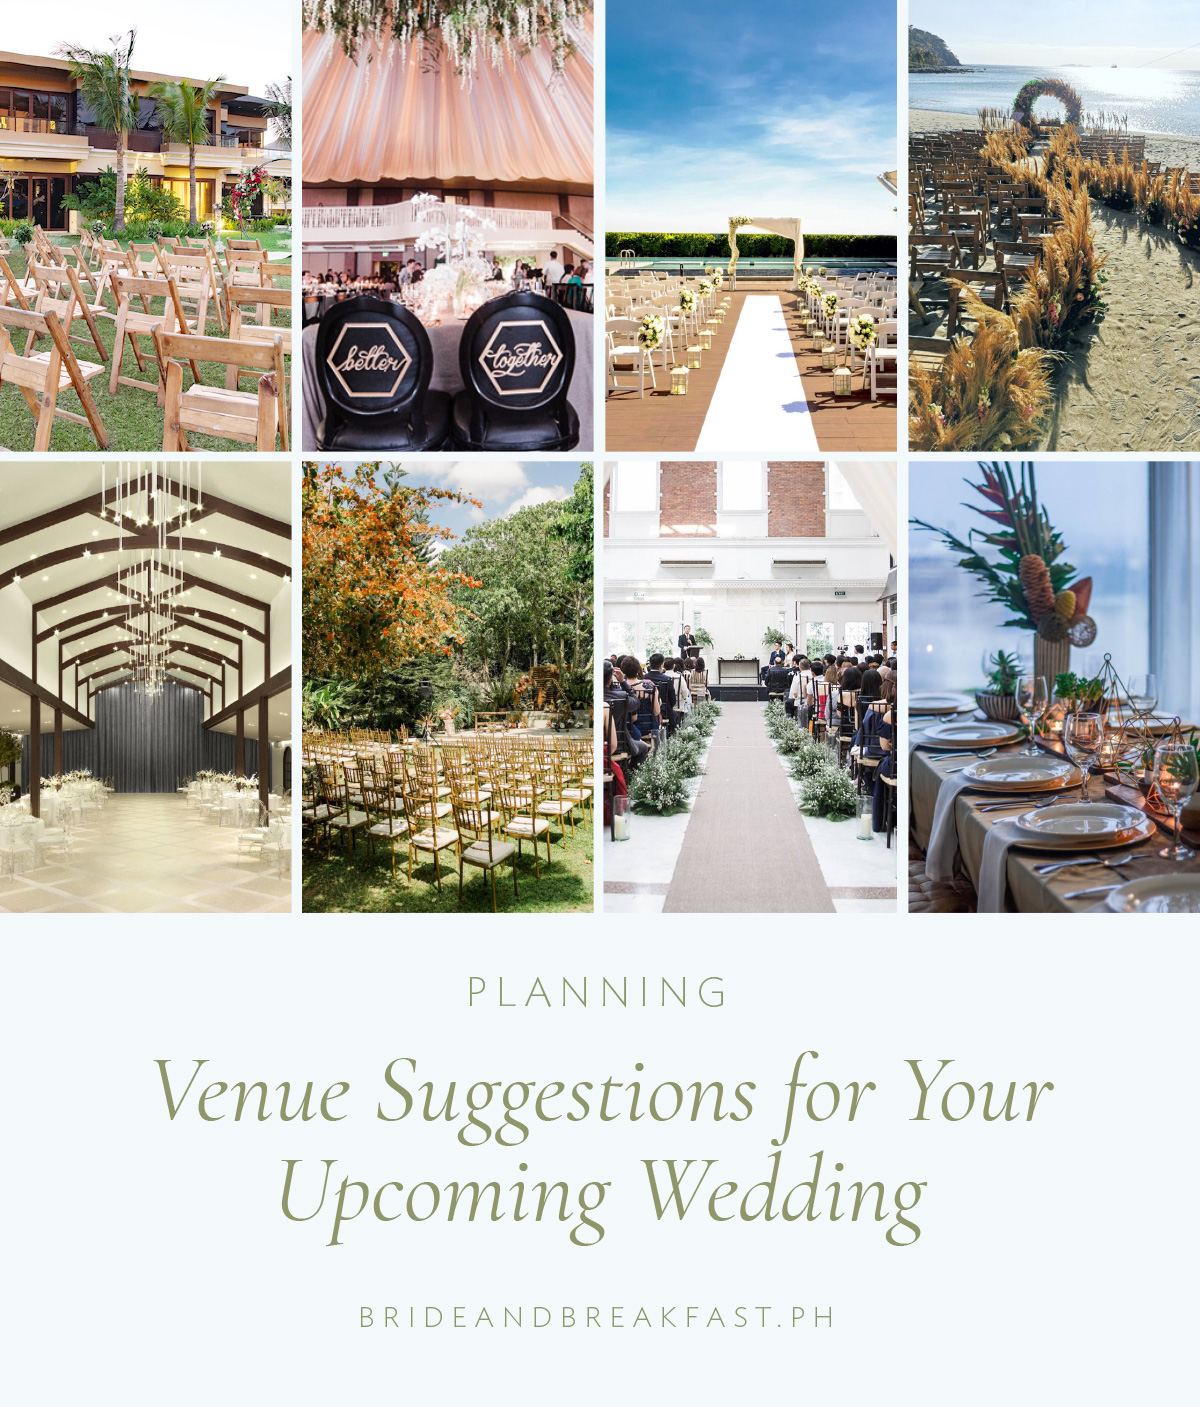 Venue Suggestions for Your Upcoming Wedding